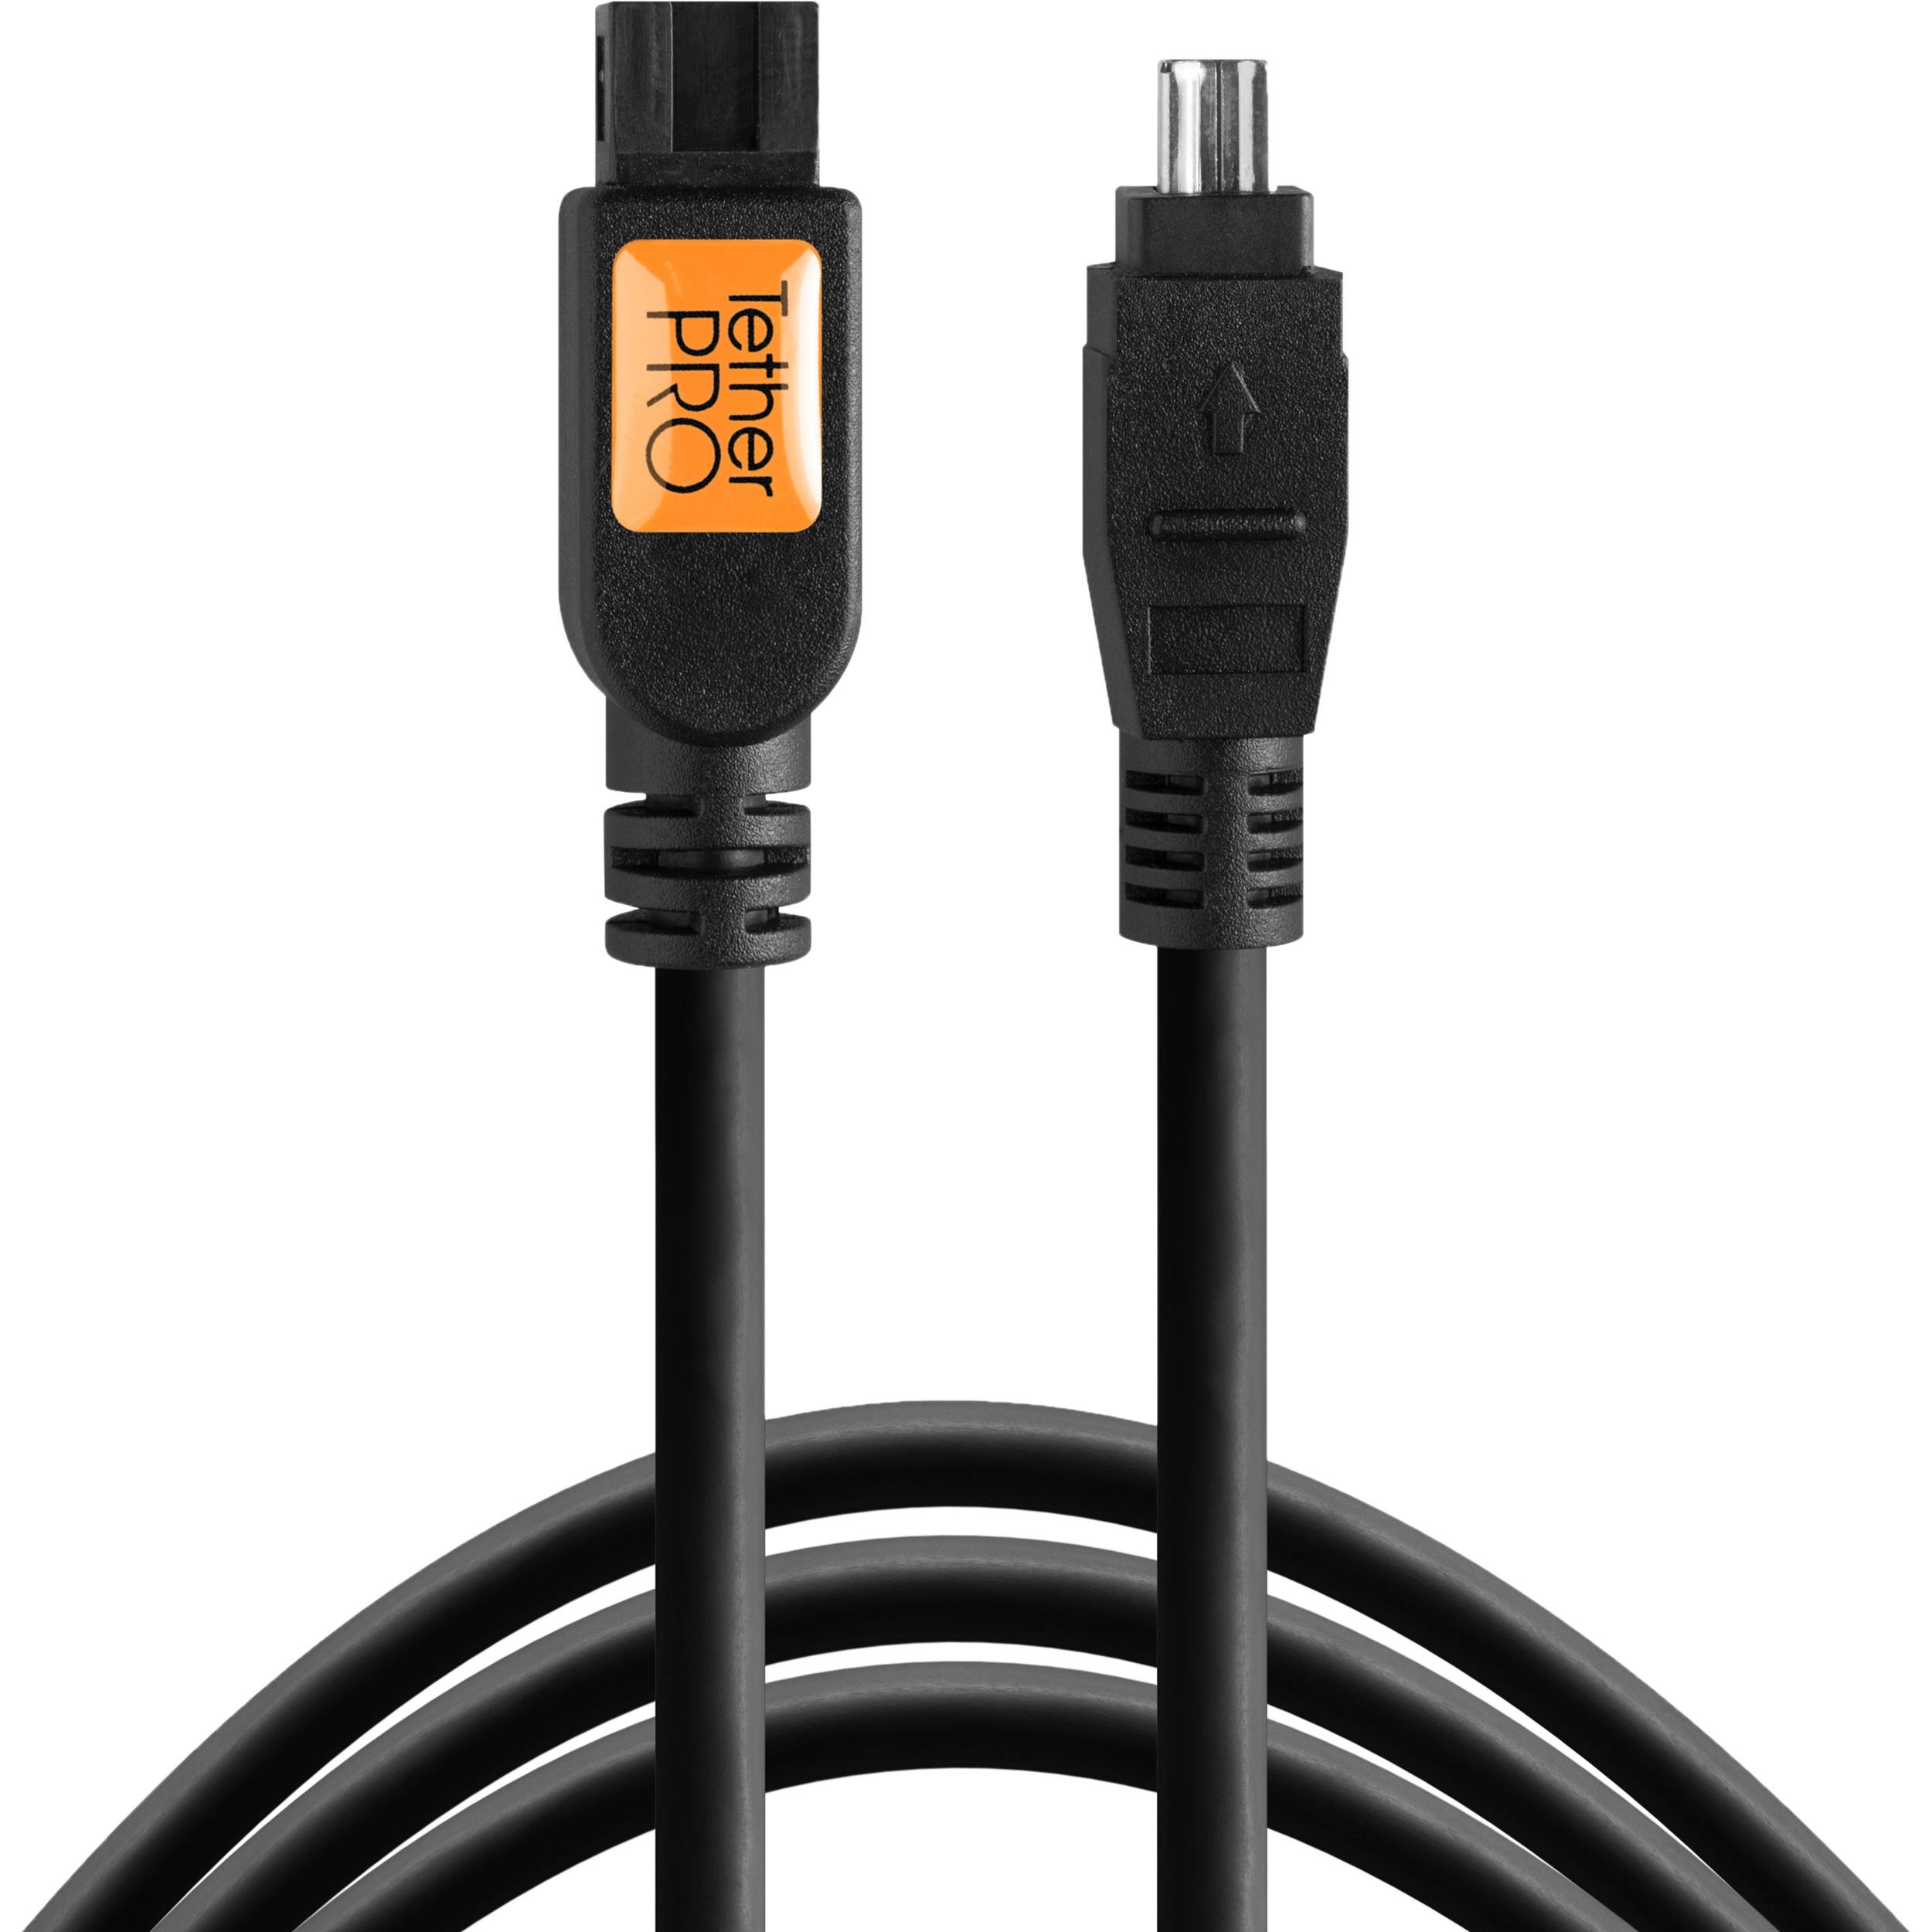 Tether Tools TetherPro FireWire 800 9-pin to FireWire 400 4-pin Cable (Black, 15')